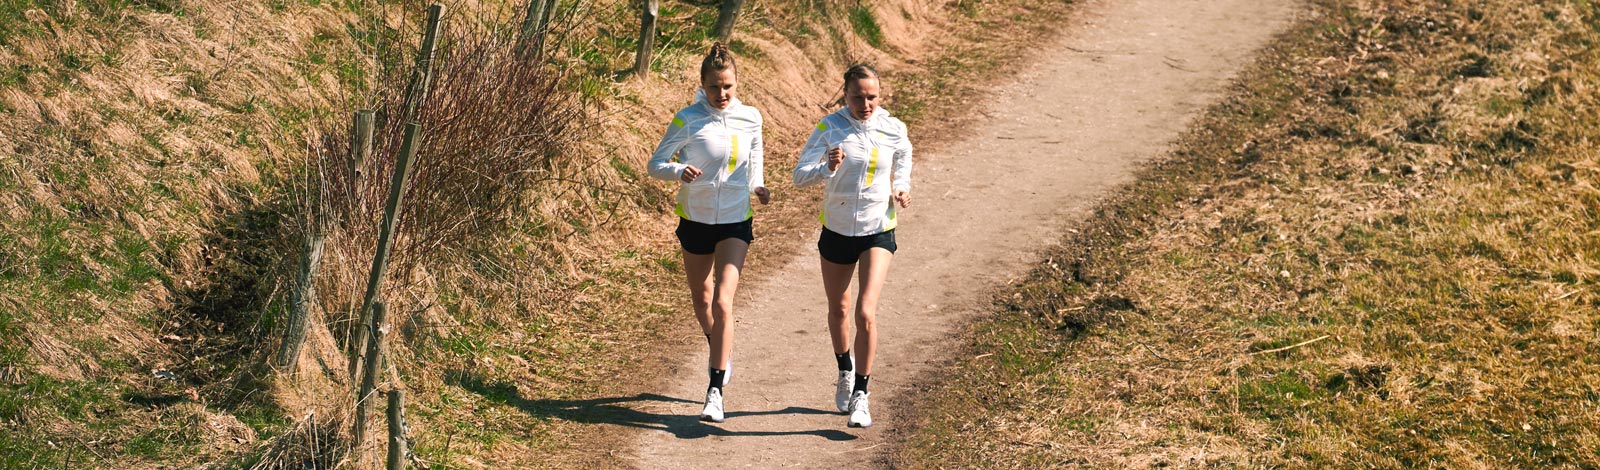 Two runners in bright running jackets run on a narrow path between sparingly overgrown meadows in nature